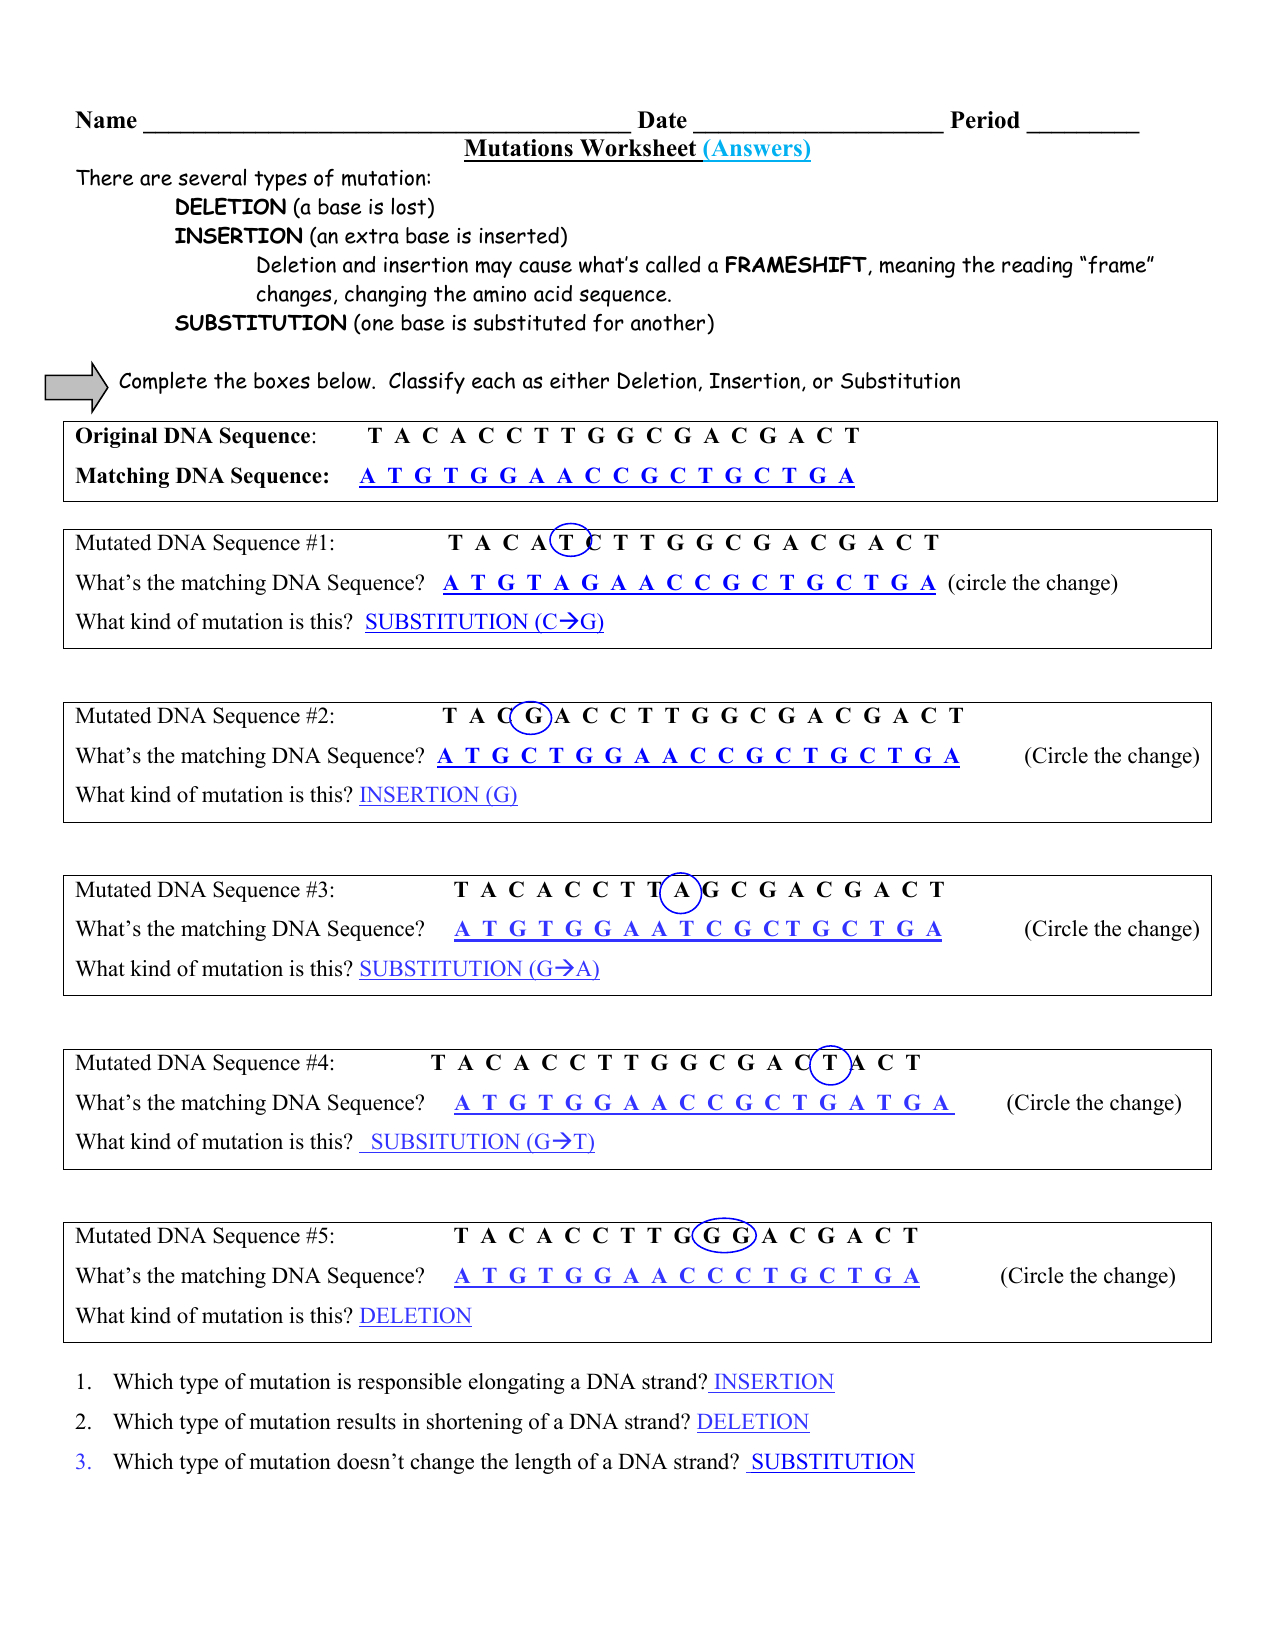 Awesome Collection Of Mutations Worksheet Answers Biology The Best Intended For Dna Mutations Worksheet Answer Key